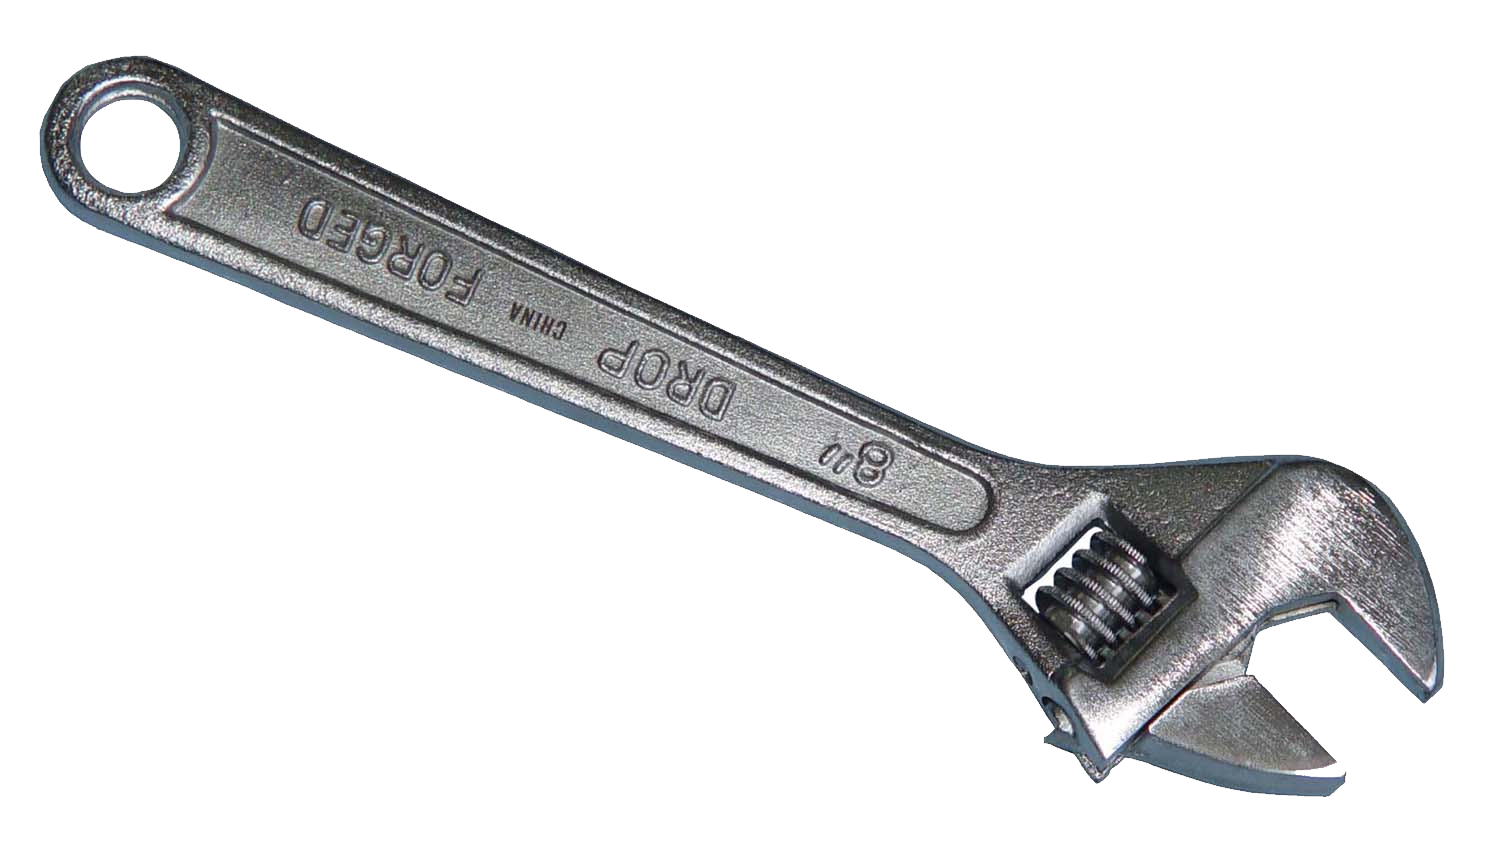 Wrench Icon image #25551